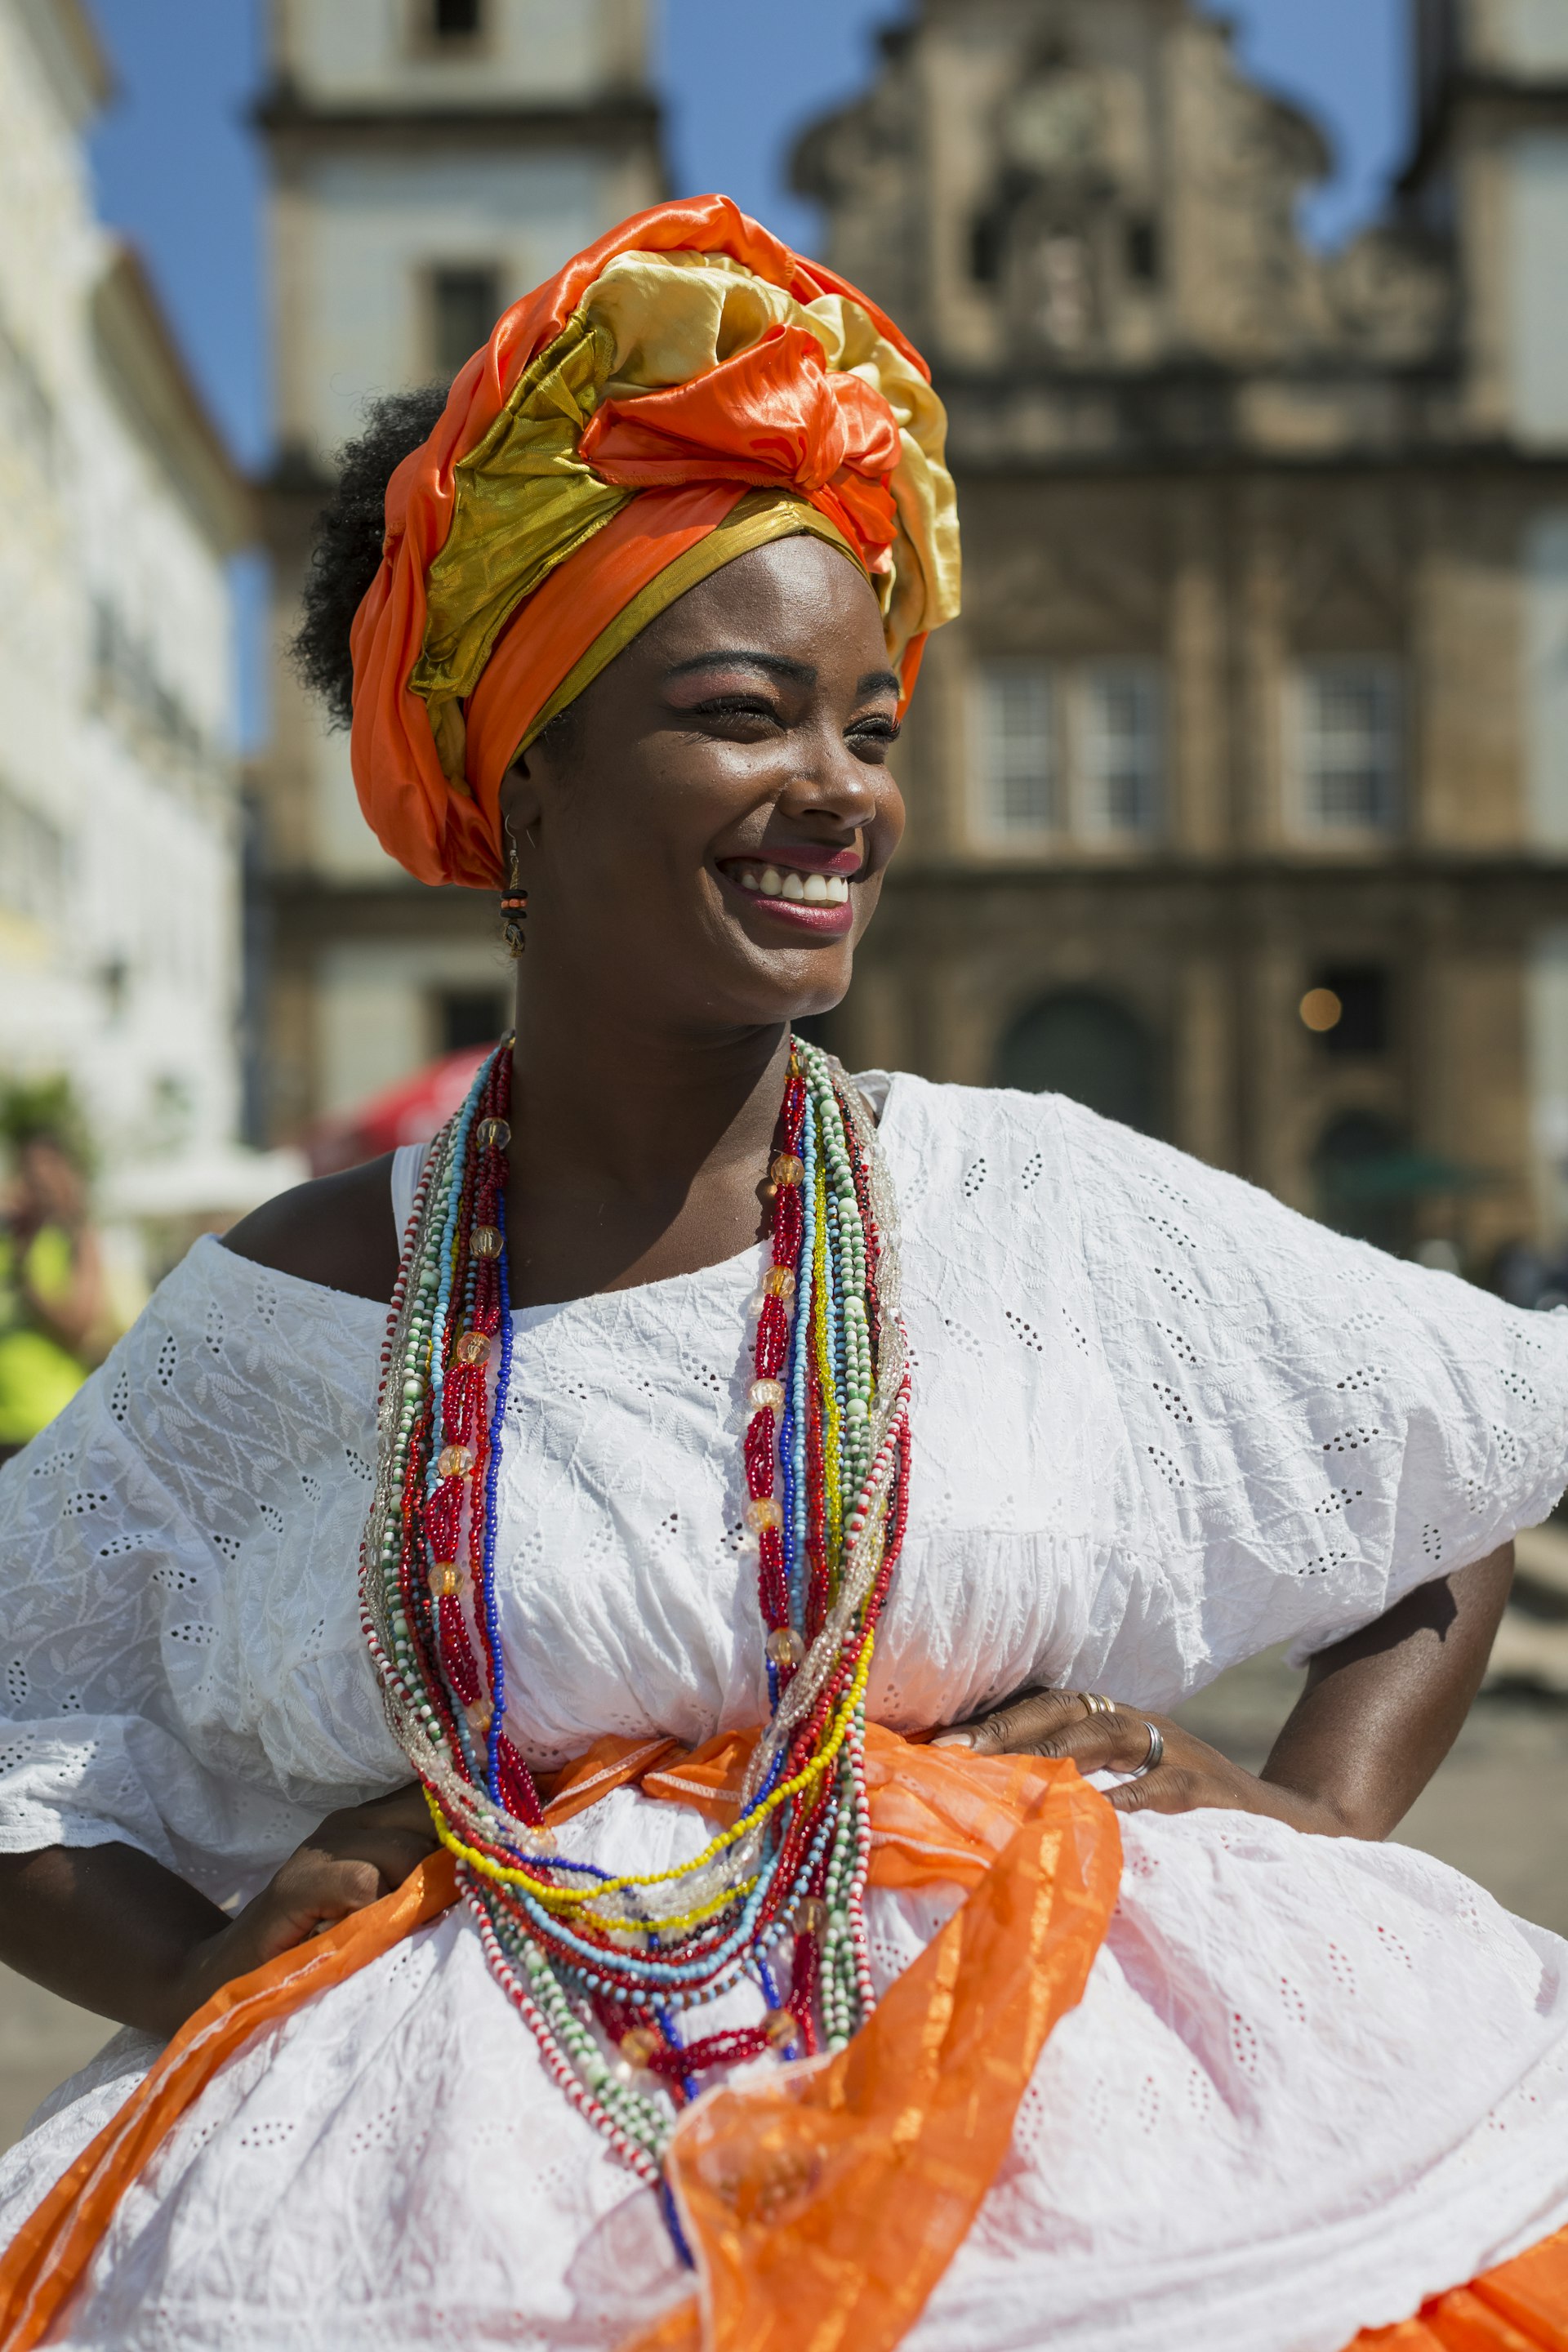 A woman wears typical Afro-Baiana dress in Salvador, Bahía, with a colonial-era church in the background